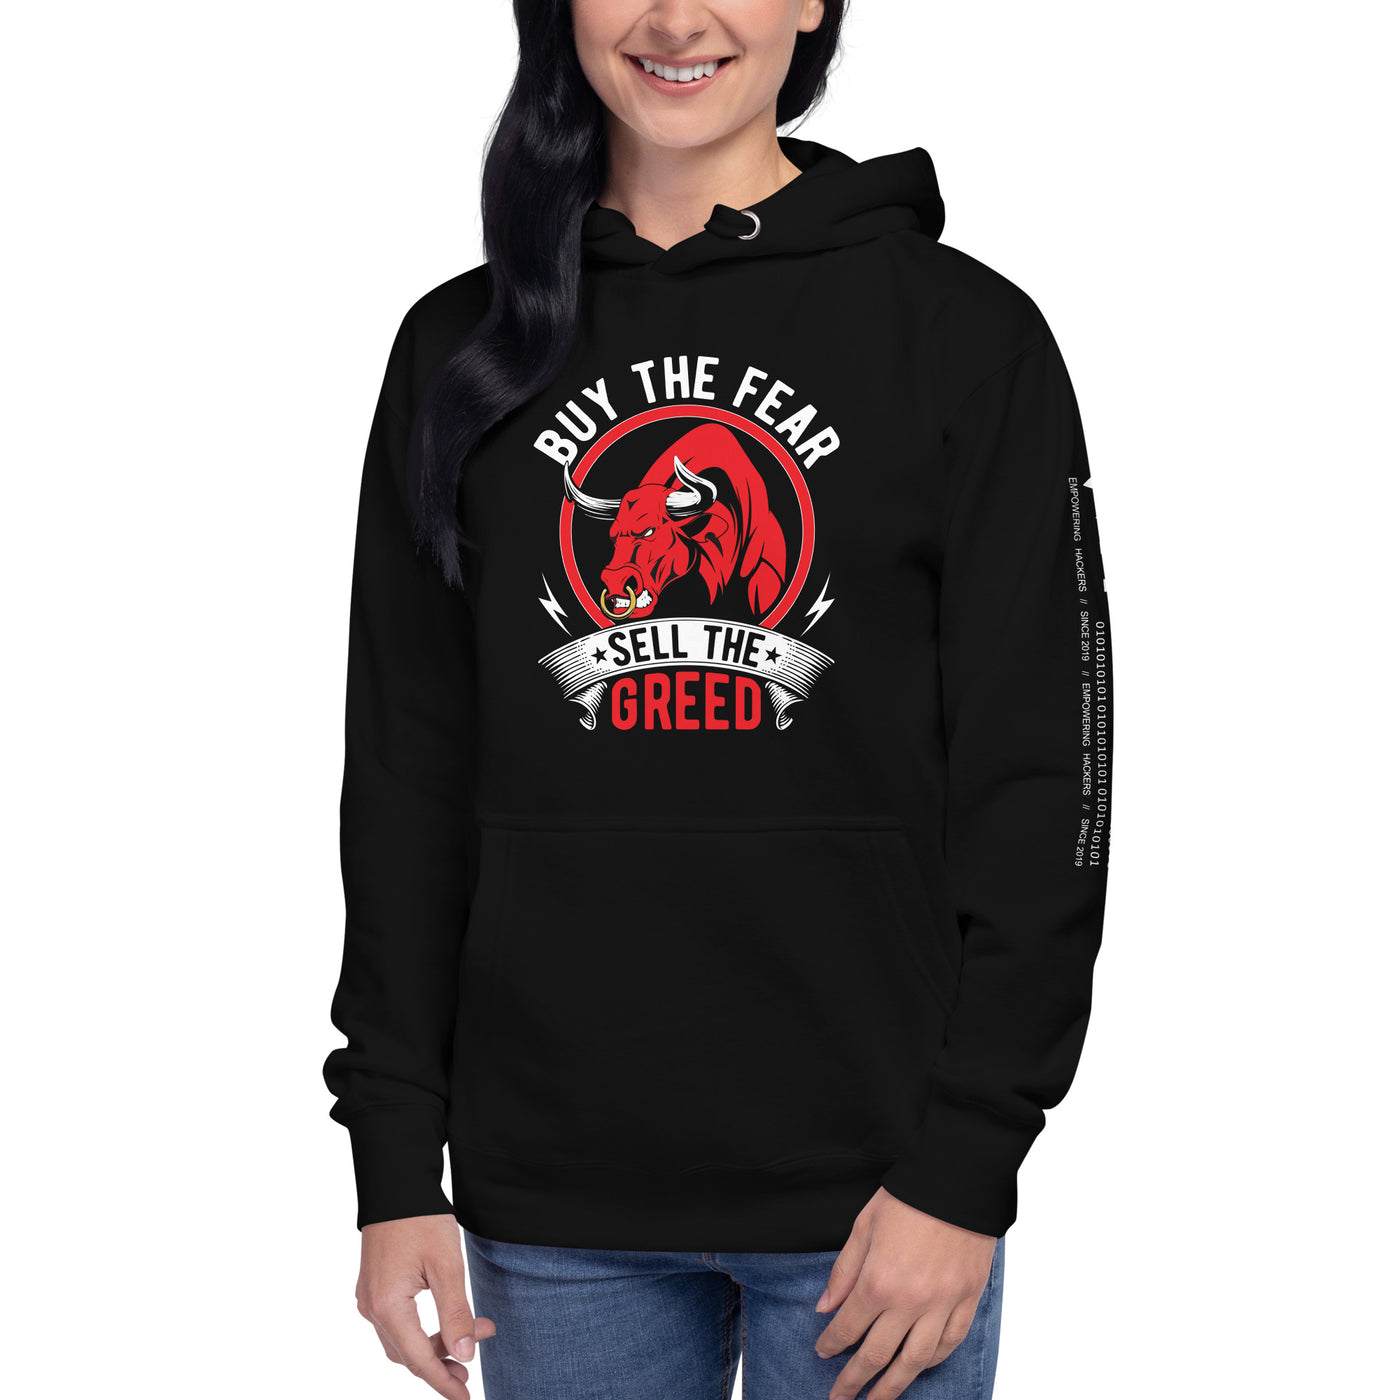 Buy the Fear; Sell the Greed - Unisex Hoodie